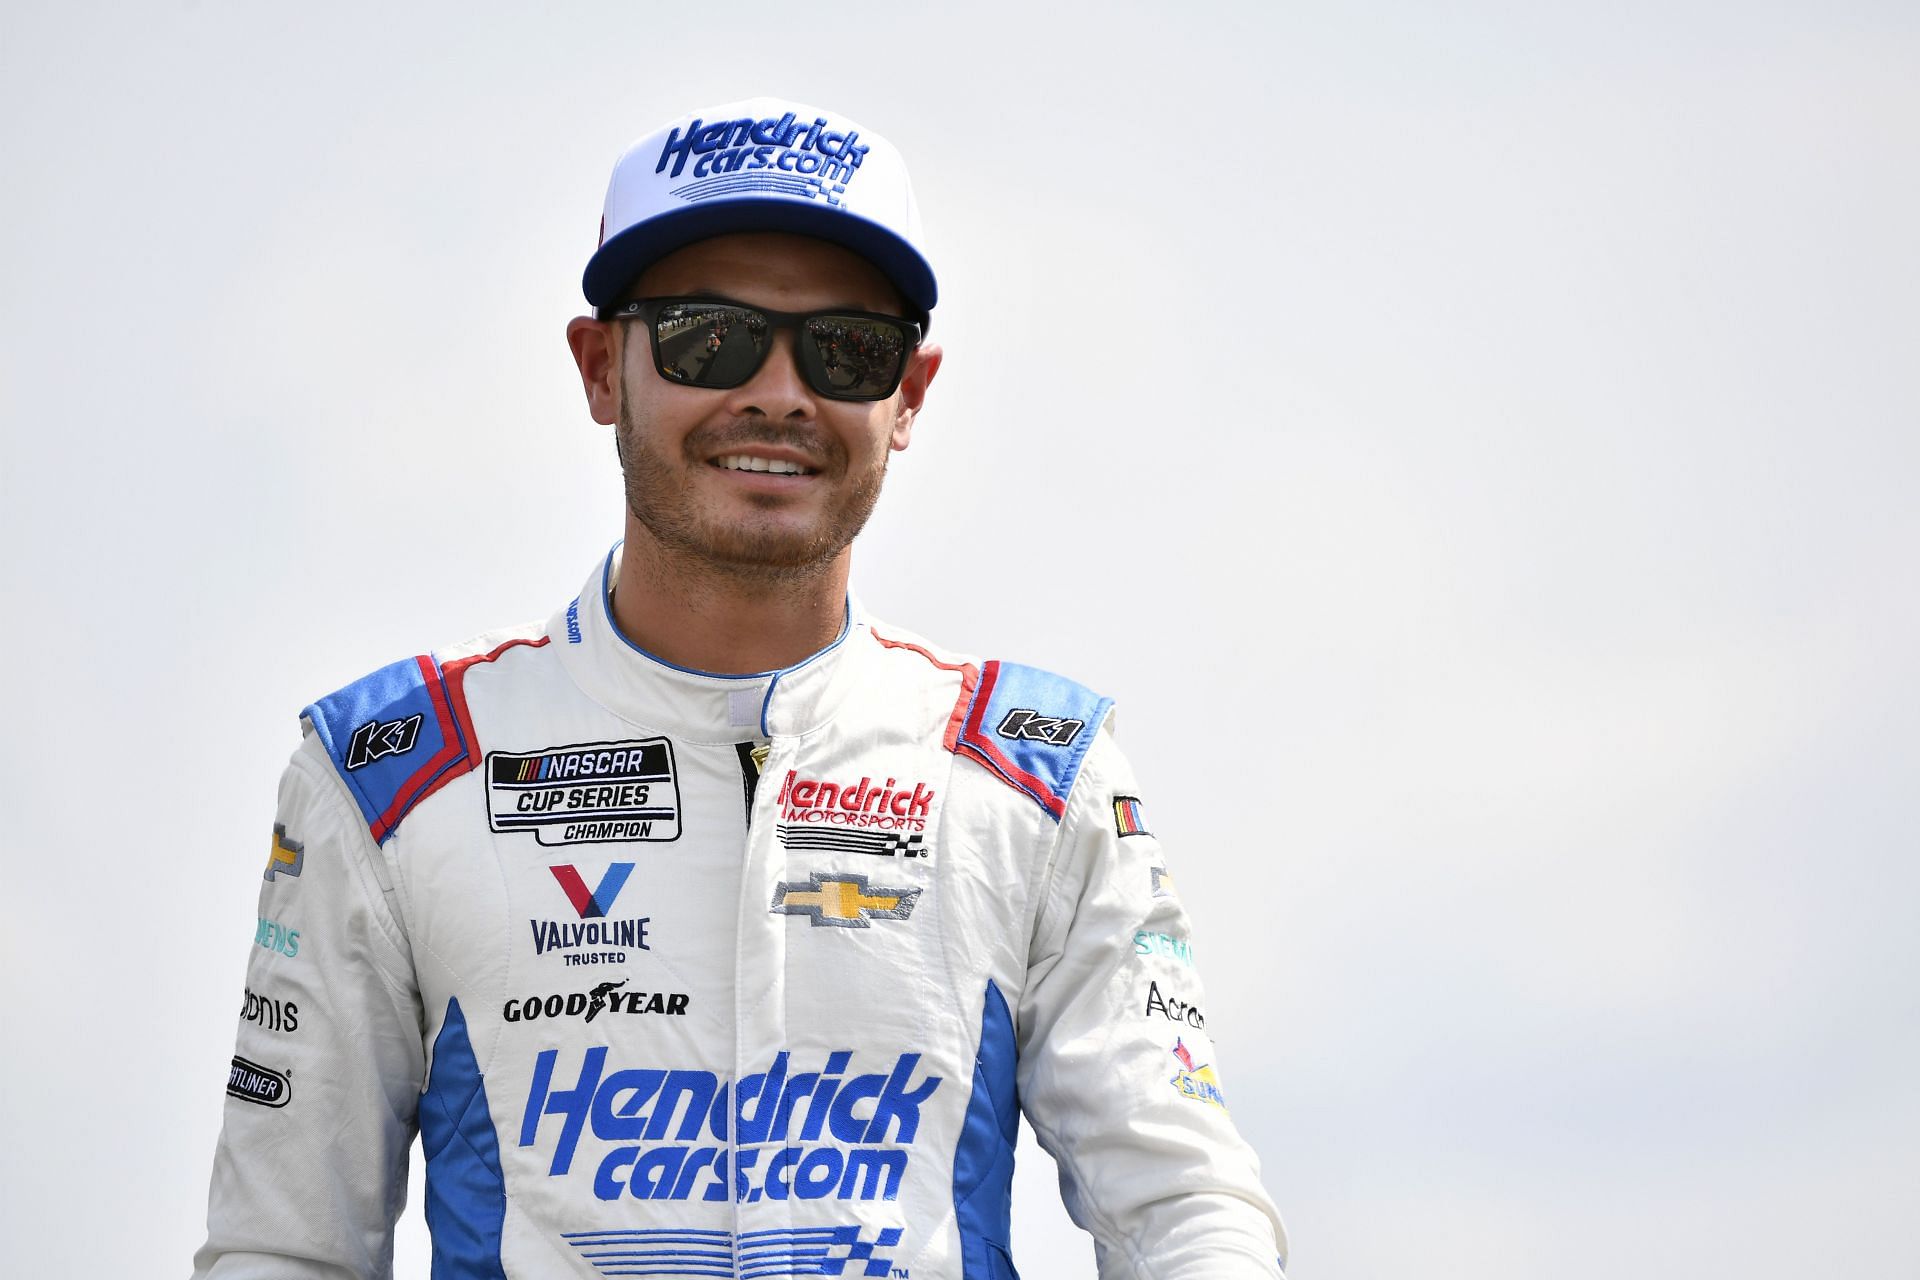 Kyle Larson walks onstage during driver intros prior to the NASCAR Cup Series Ally 400 at Nashville Superspeedway